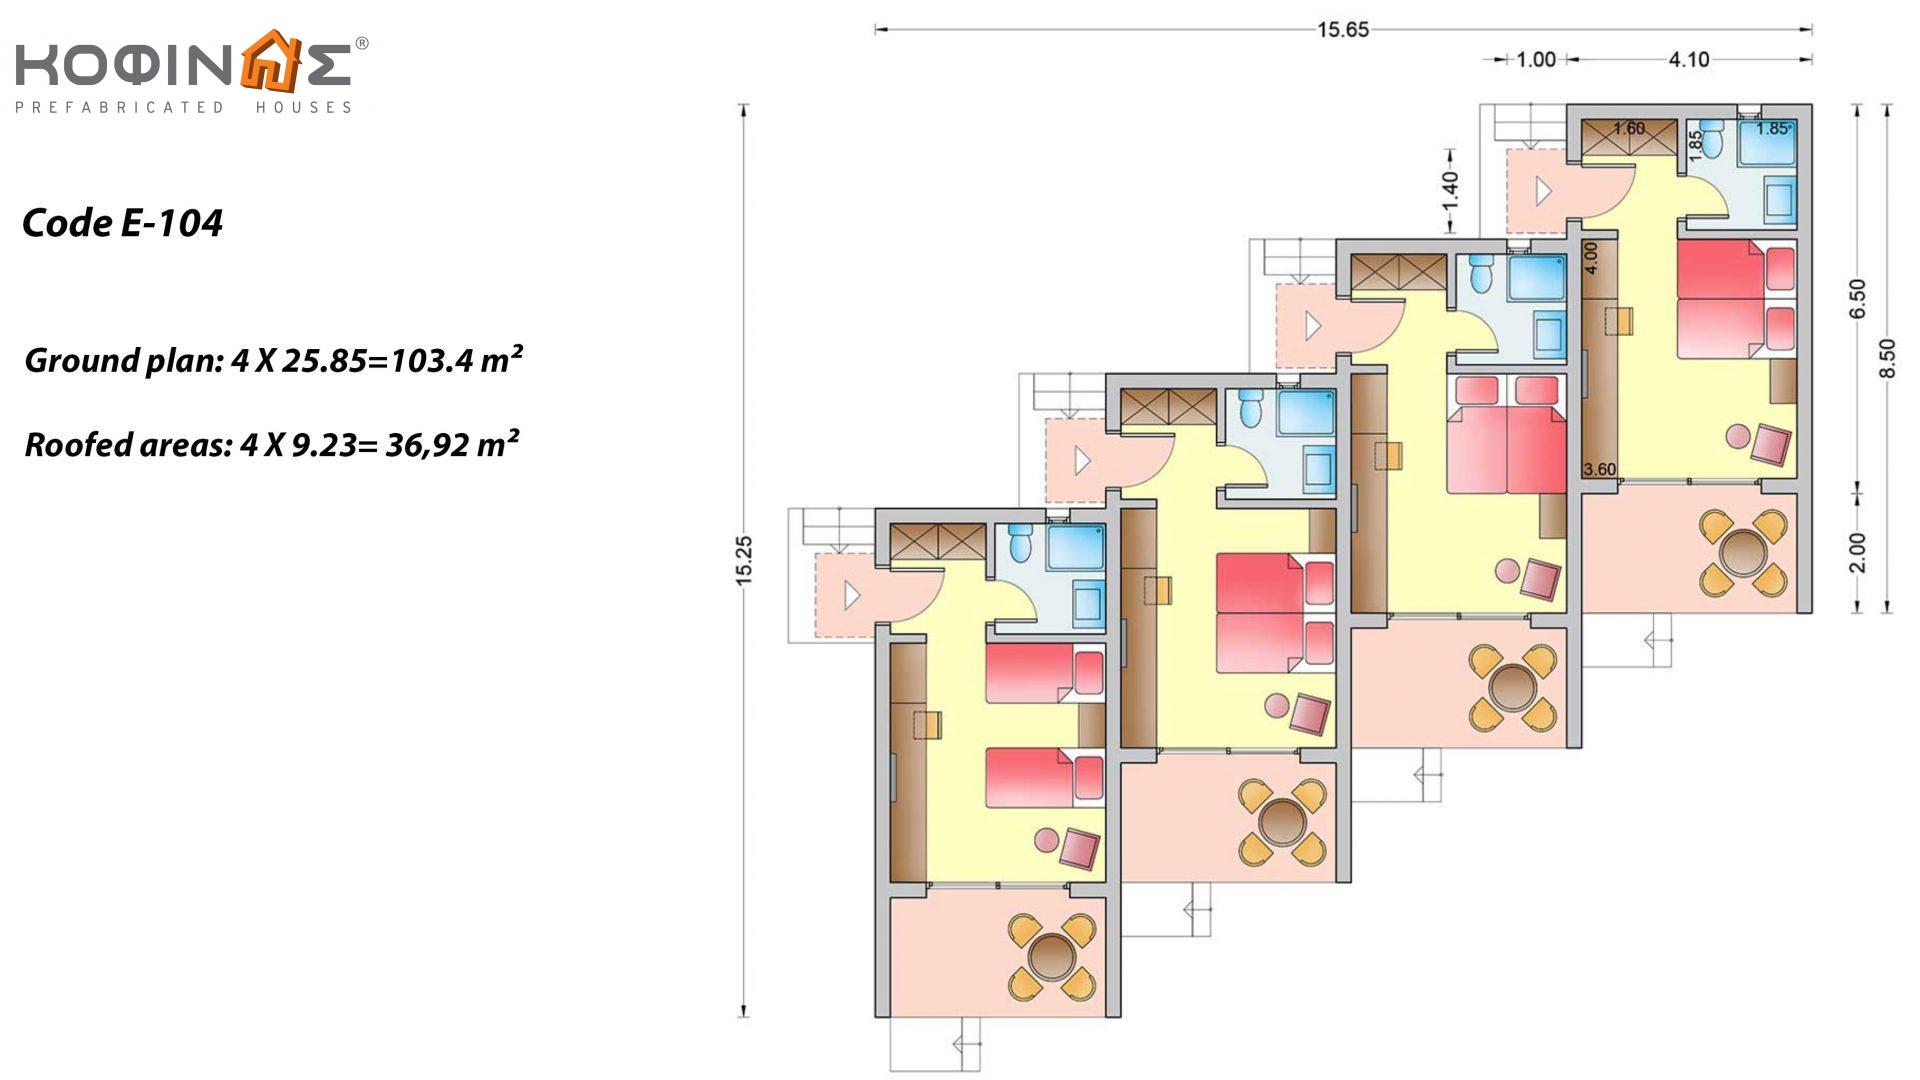 Flat Complex E-104, total surface of 4 x 25,85 = 103,40 m², roofed areas 36.92 m²